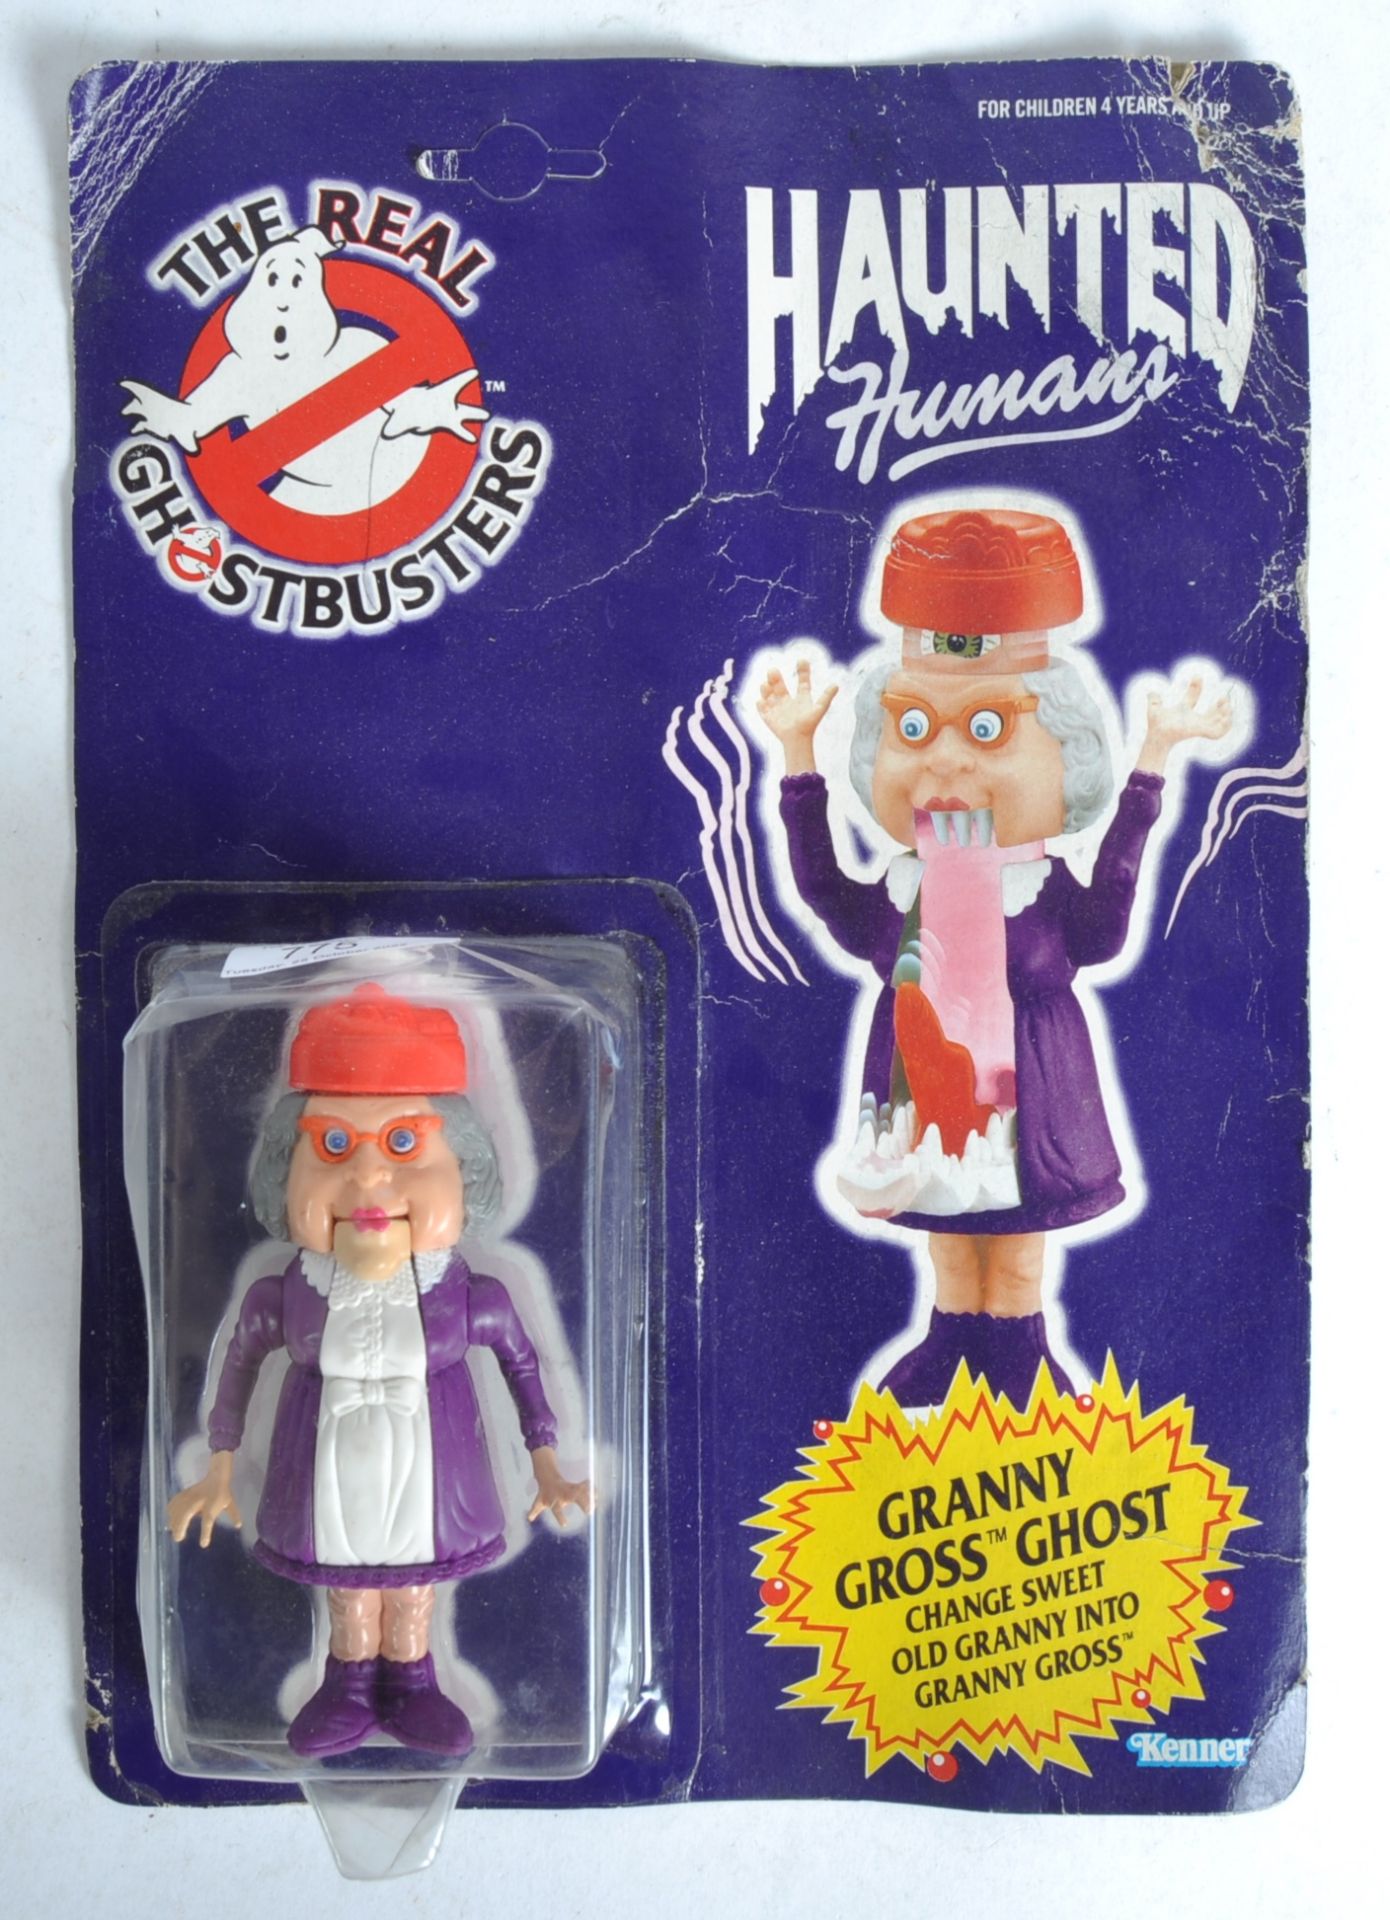 THE REAL GHOSTBUSTERS - GRANNY GROSS GHOST ACTION FIGURES